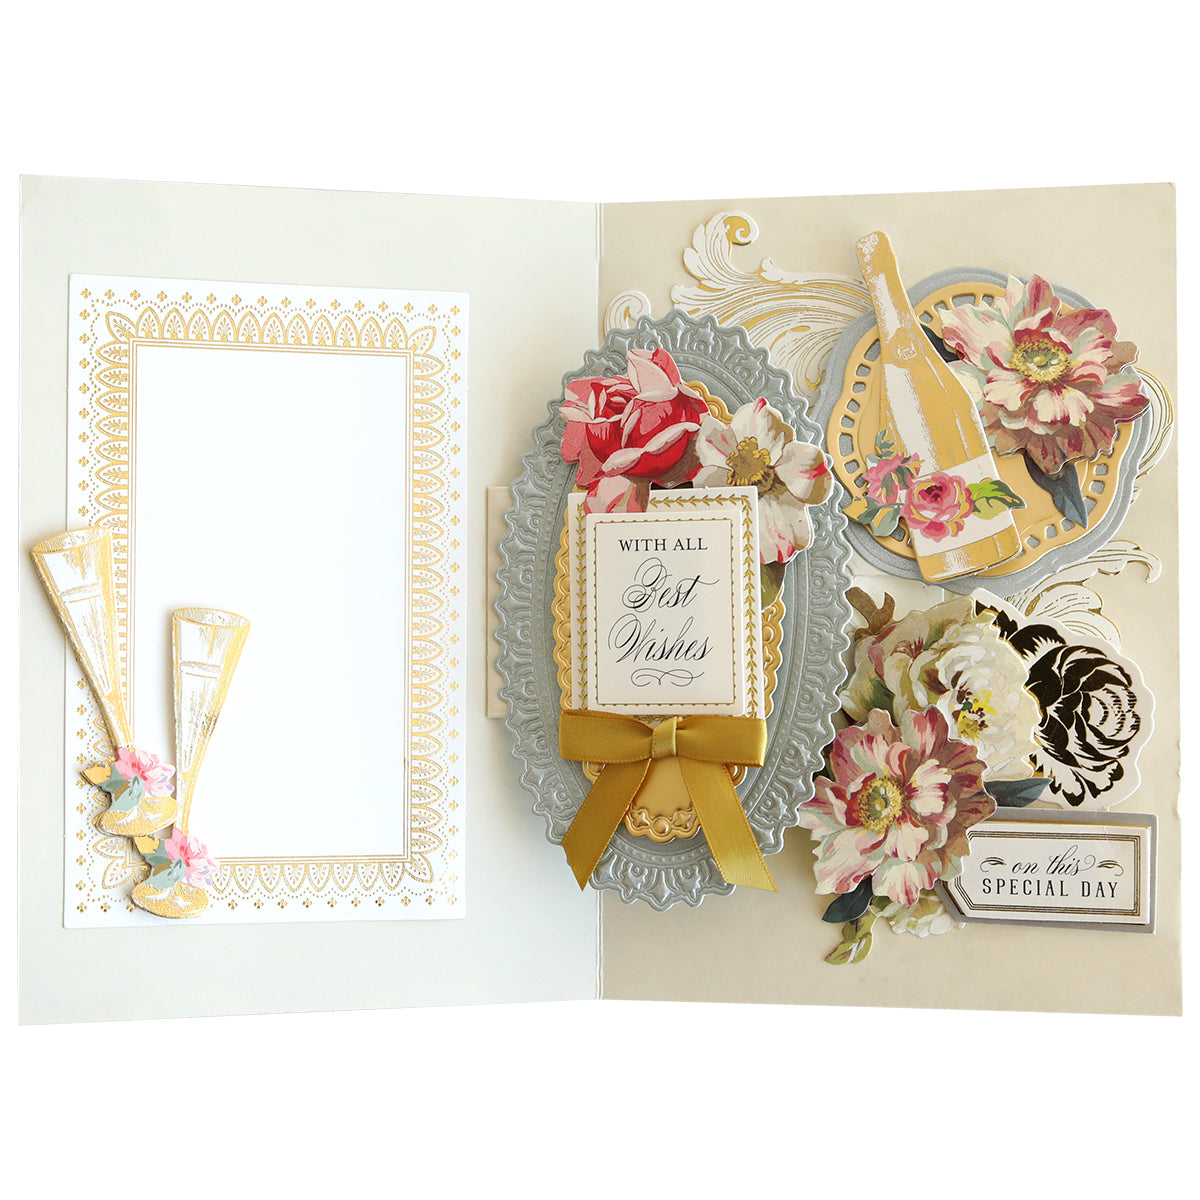 Open greeting card decorated with floral designs and elegant motifs, featuring a message "with all our best wishes" on a small book element, set against a plain background, enhanced with Swing Out Dies embellishments